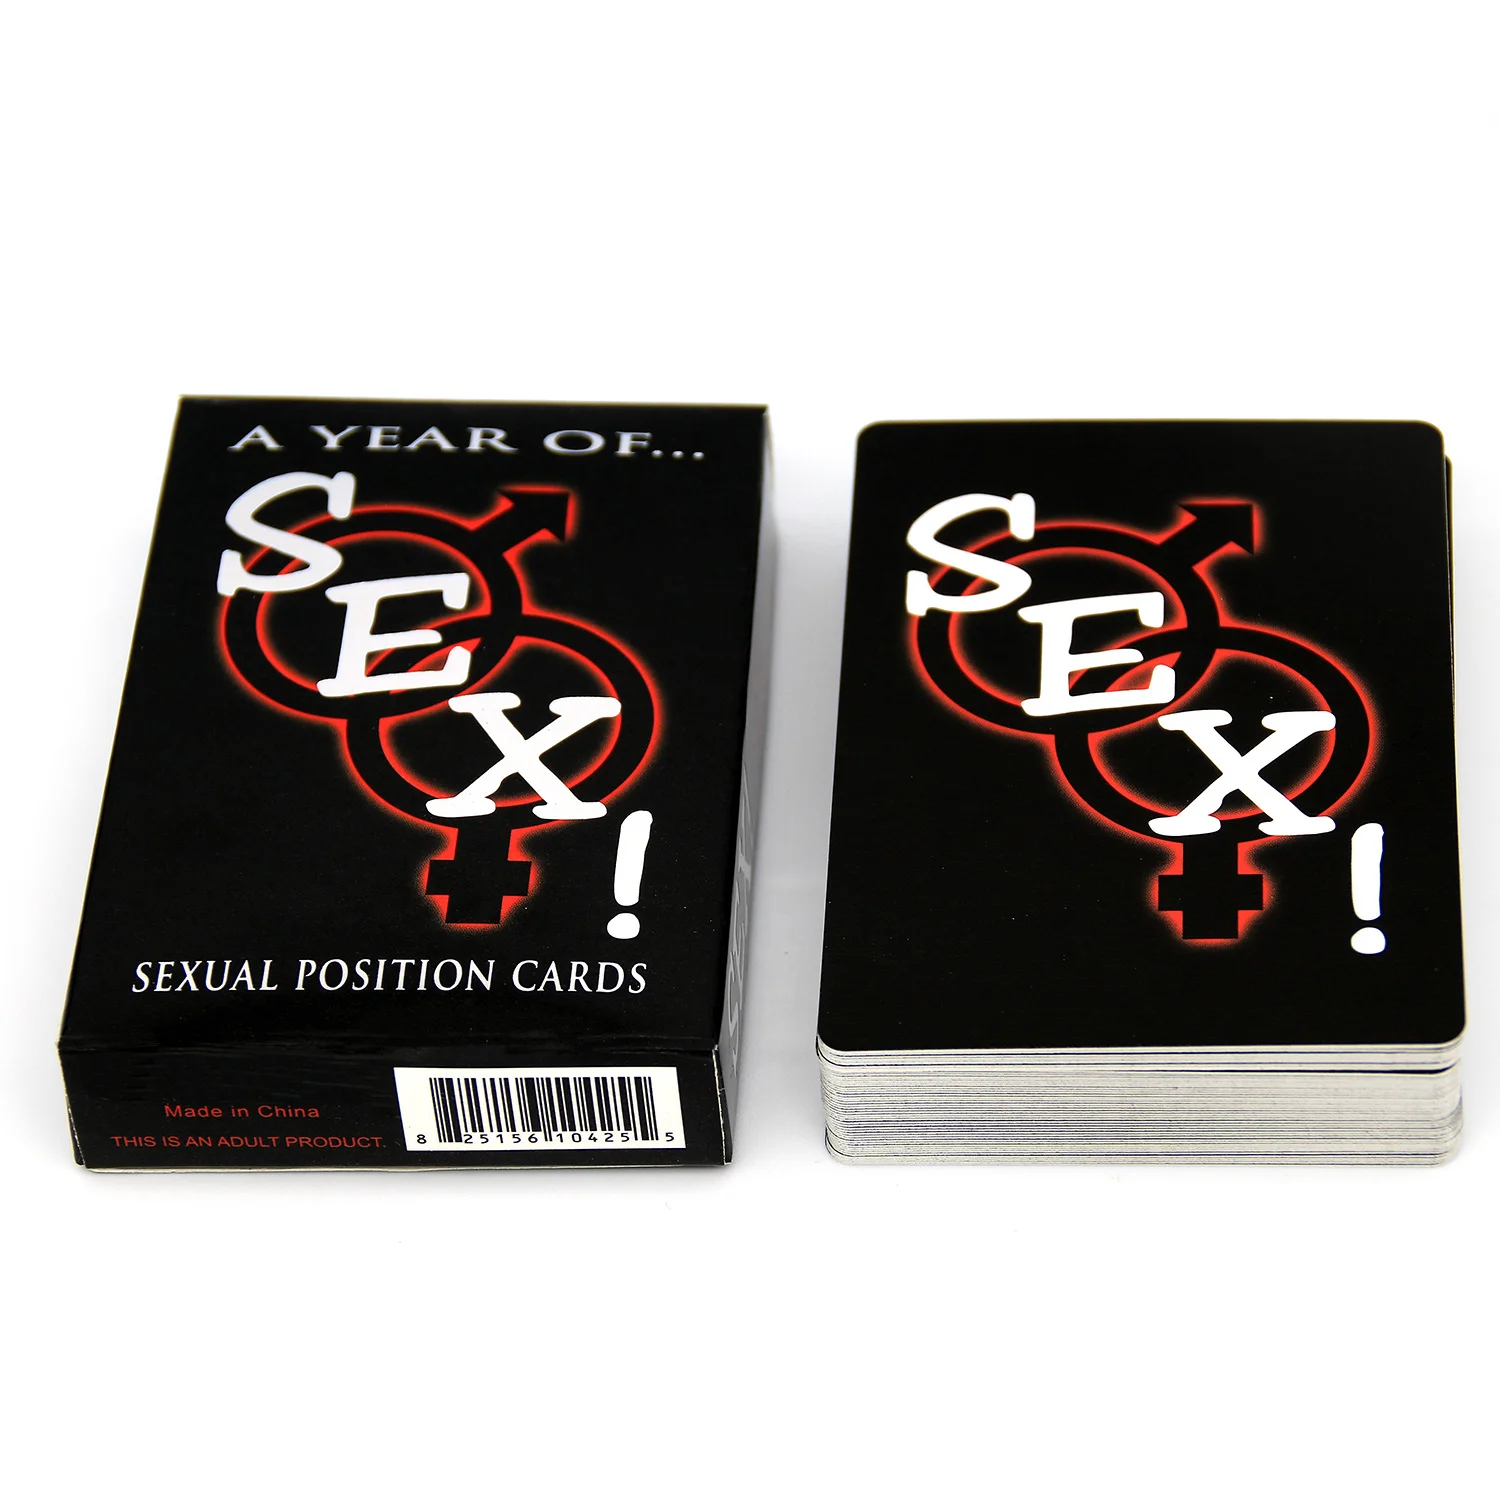 Source Couples Sex Games Card 50 Sexual Positions Card Game Sex Posture Erotic Foreplay Fun Sex Games Card For Couples Playing on m.alibaba